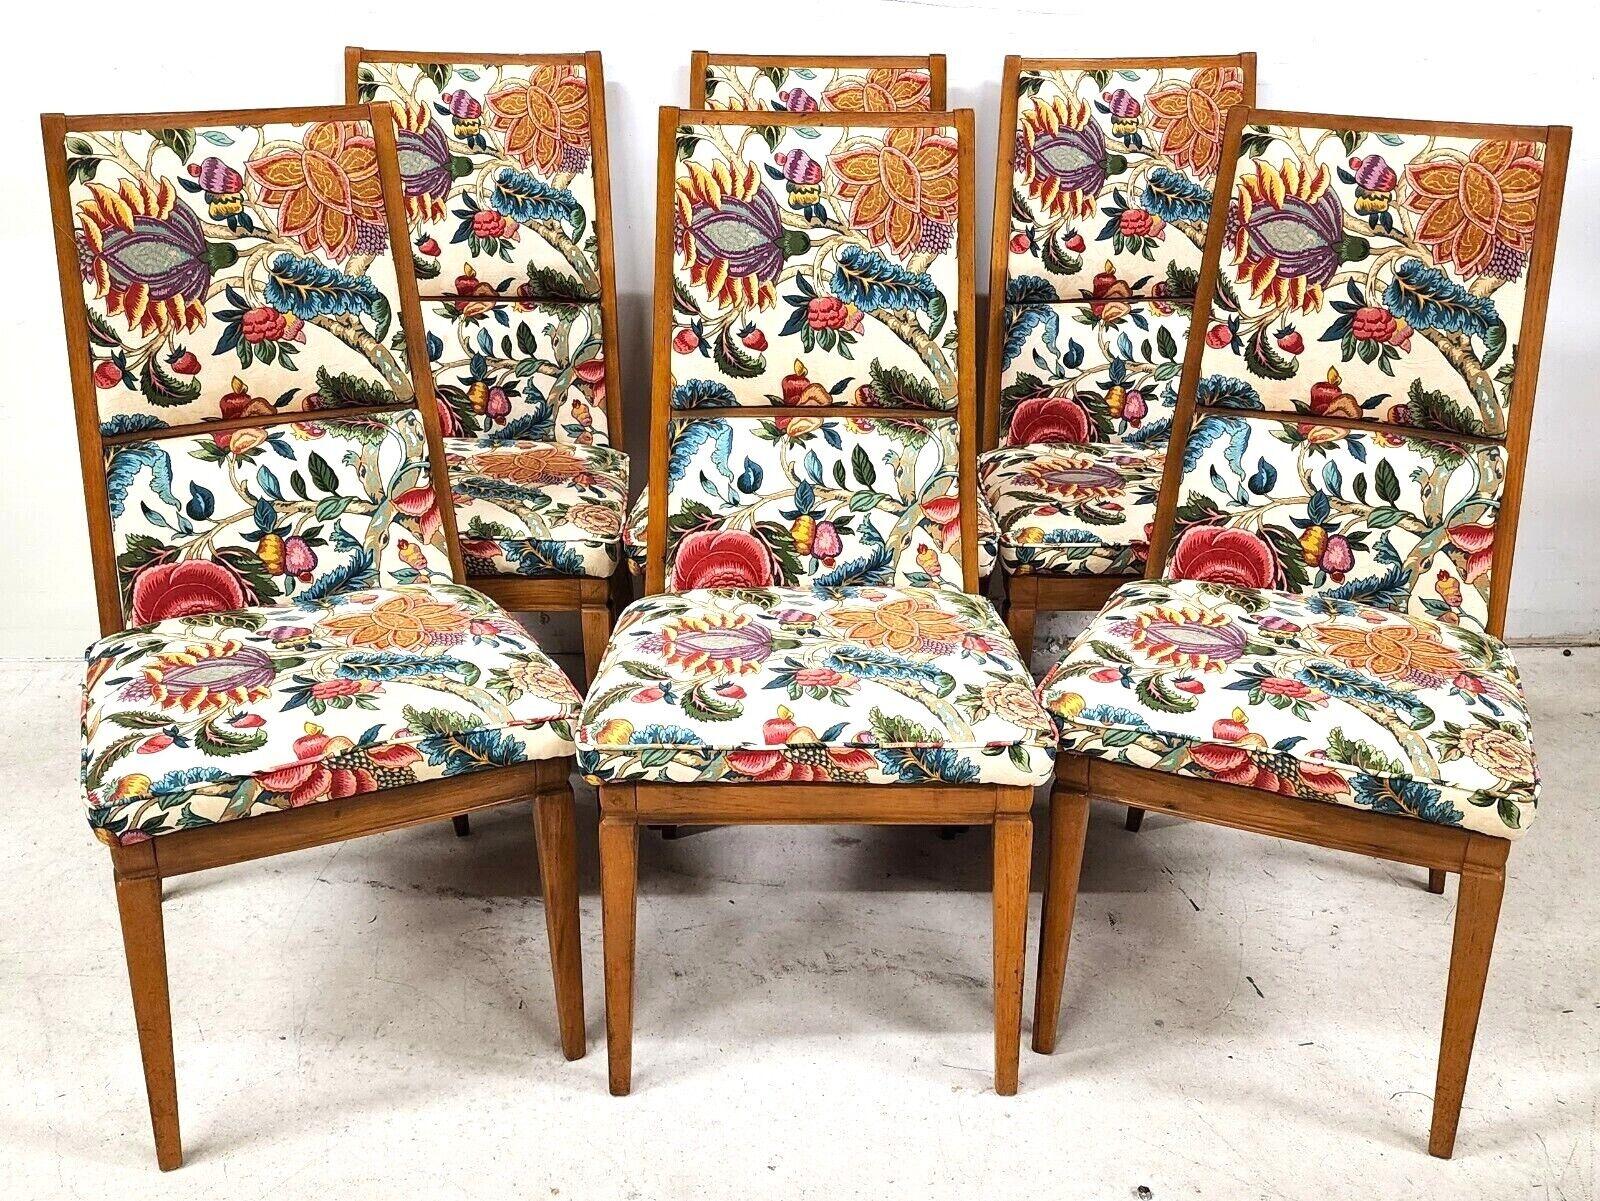 Offering one of our recent palm beach estate fine furniture acquisitions of a 
Set of 6 vintage MCM dining chairs by Kroehler

Approximate measurements in inches
40